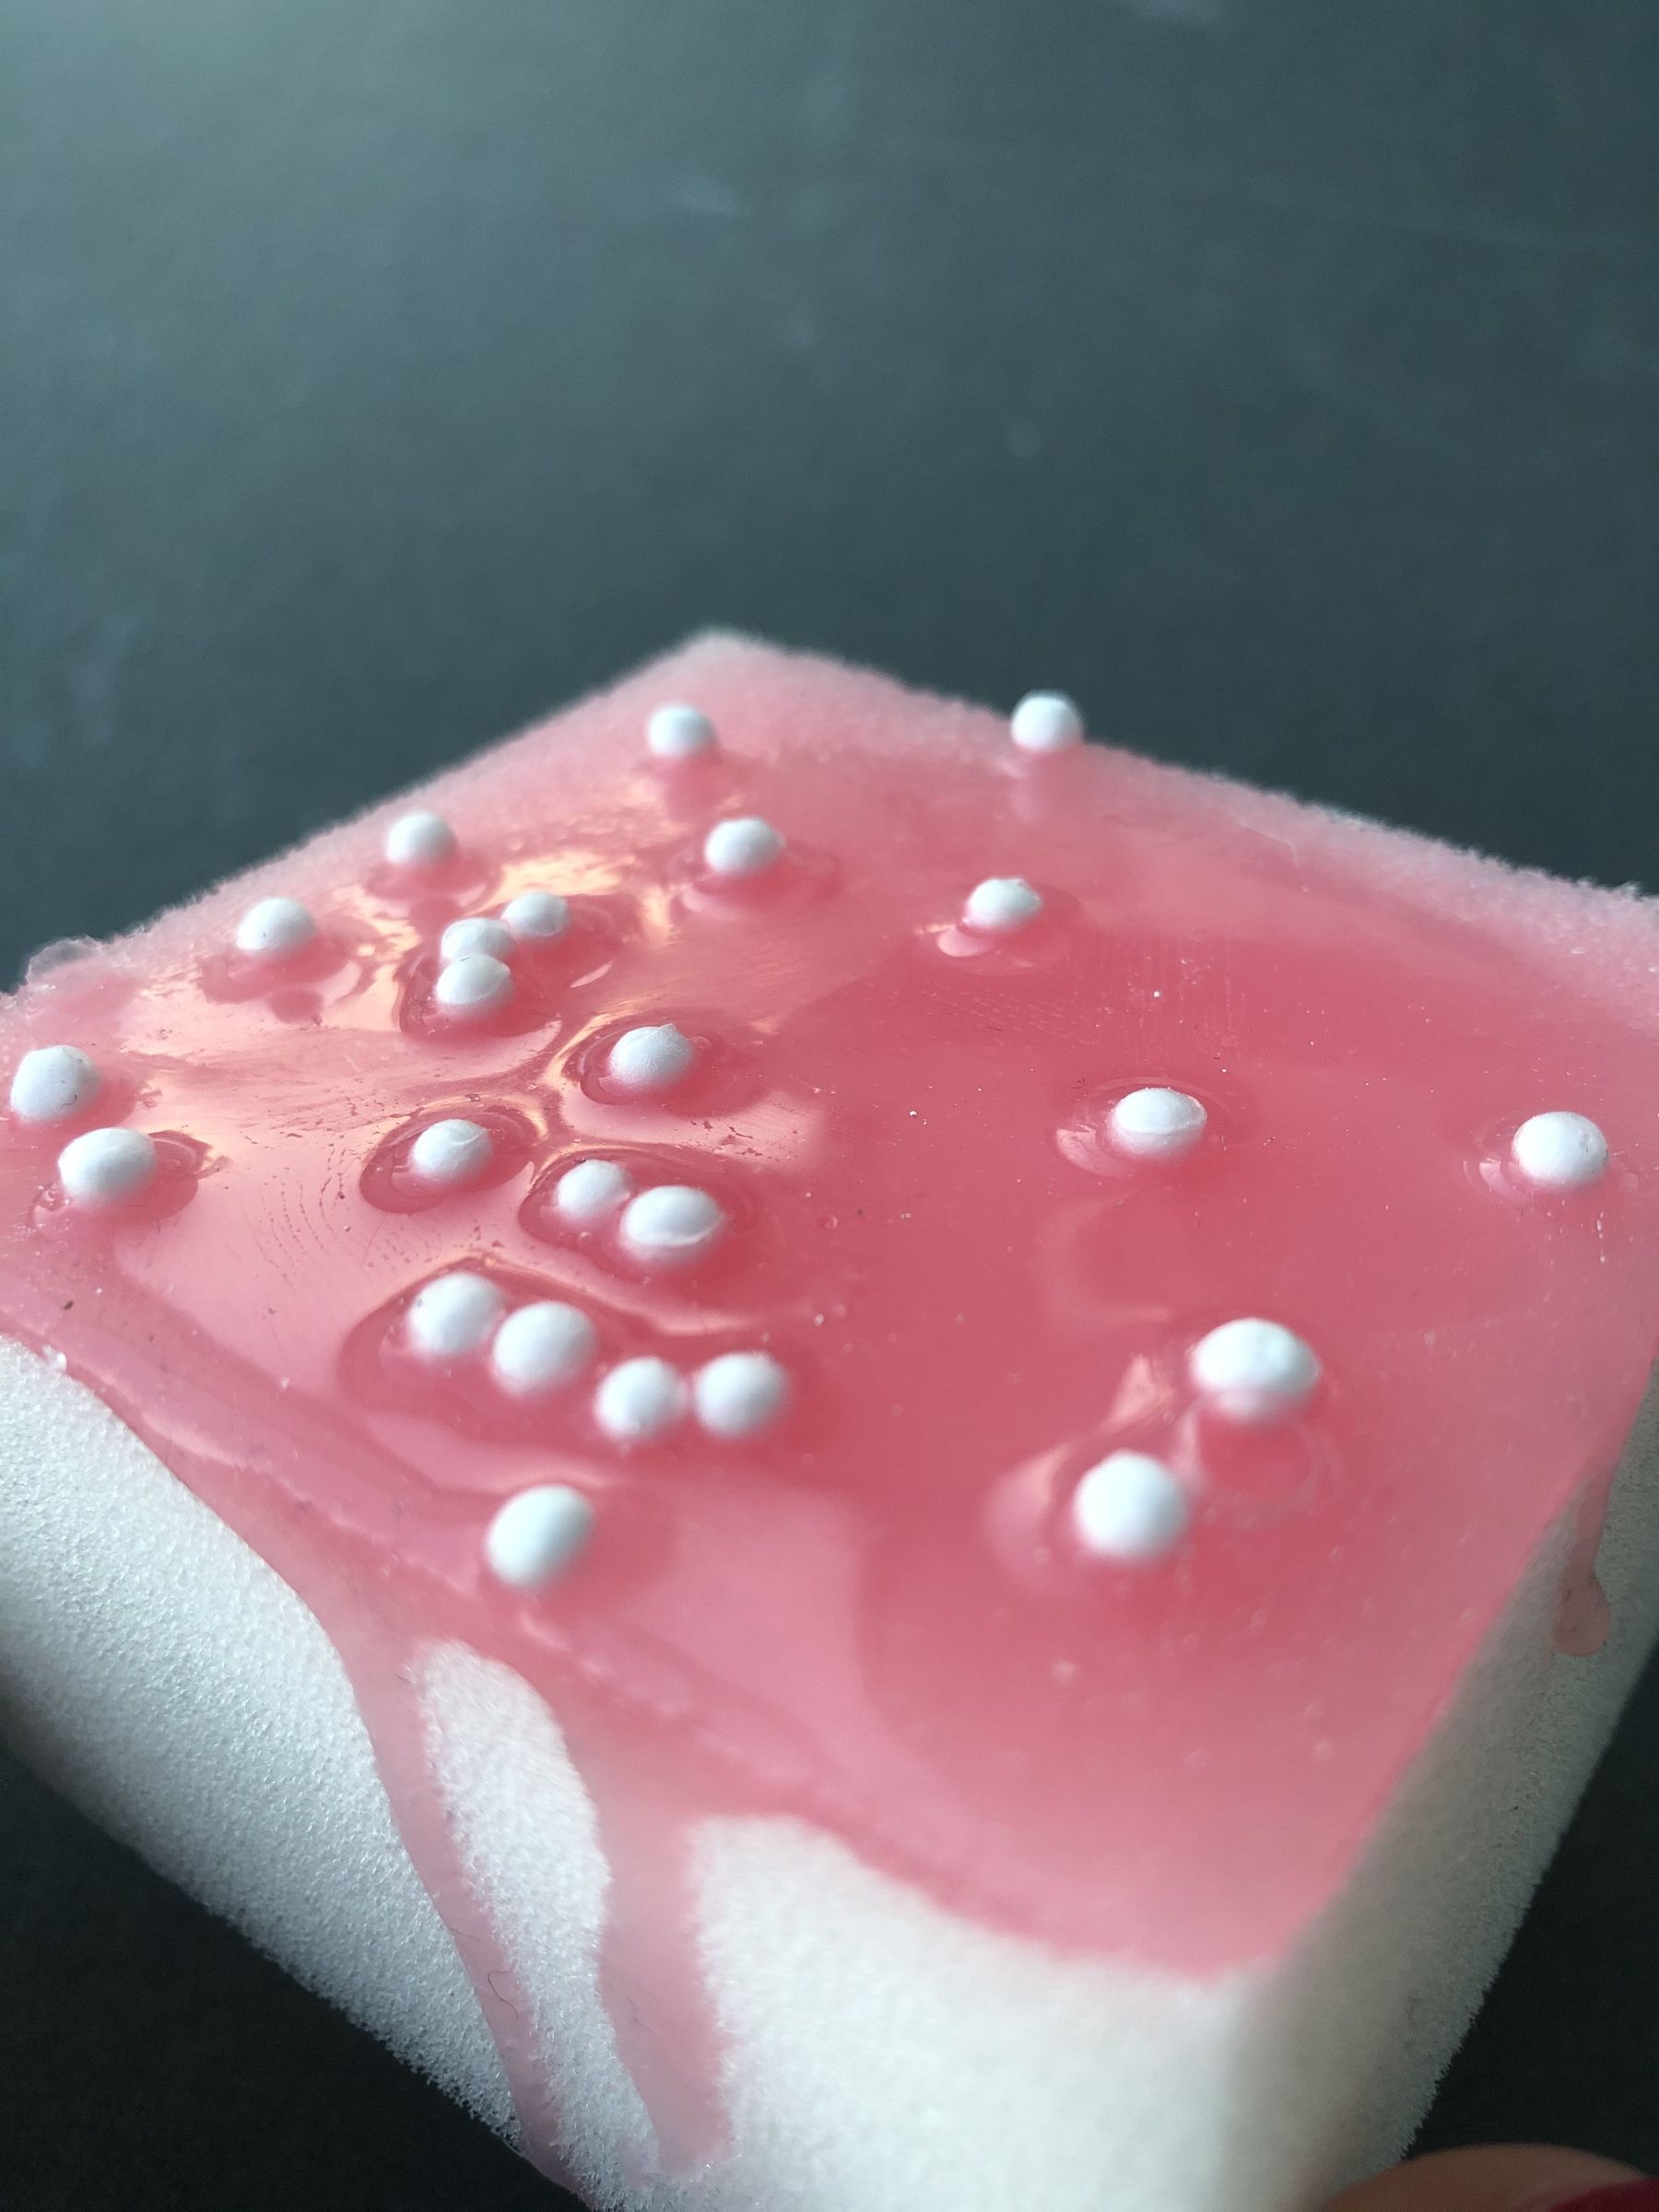 experimenting with foam and red liquidish material